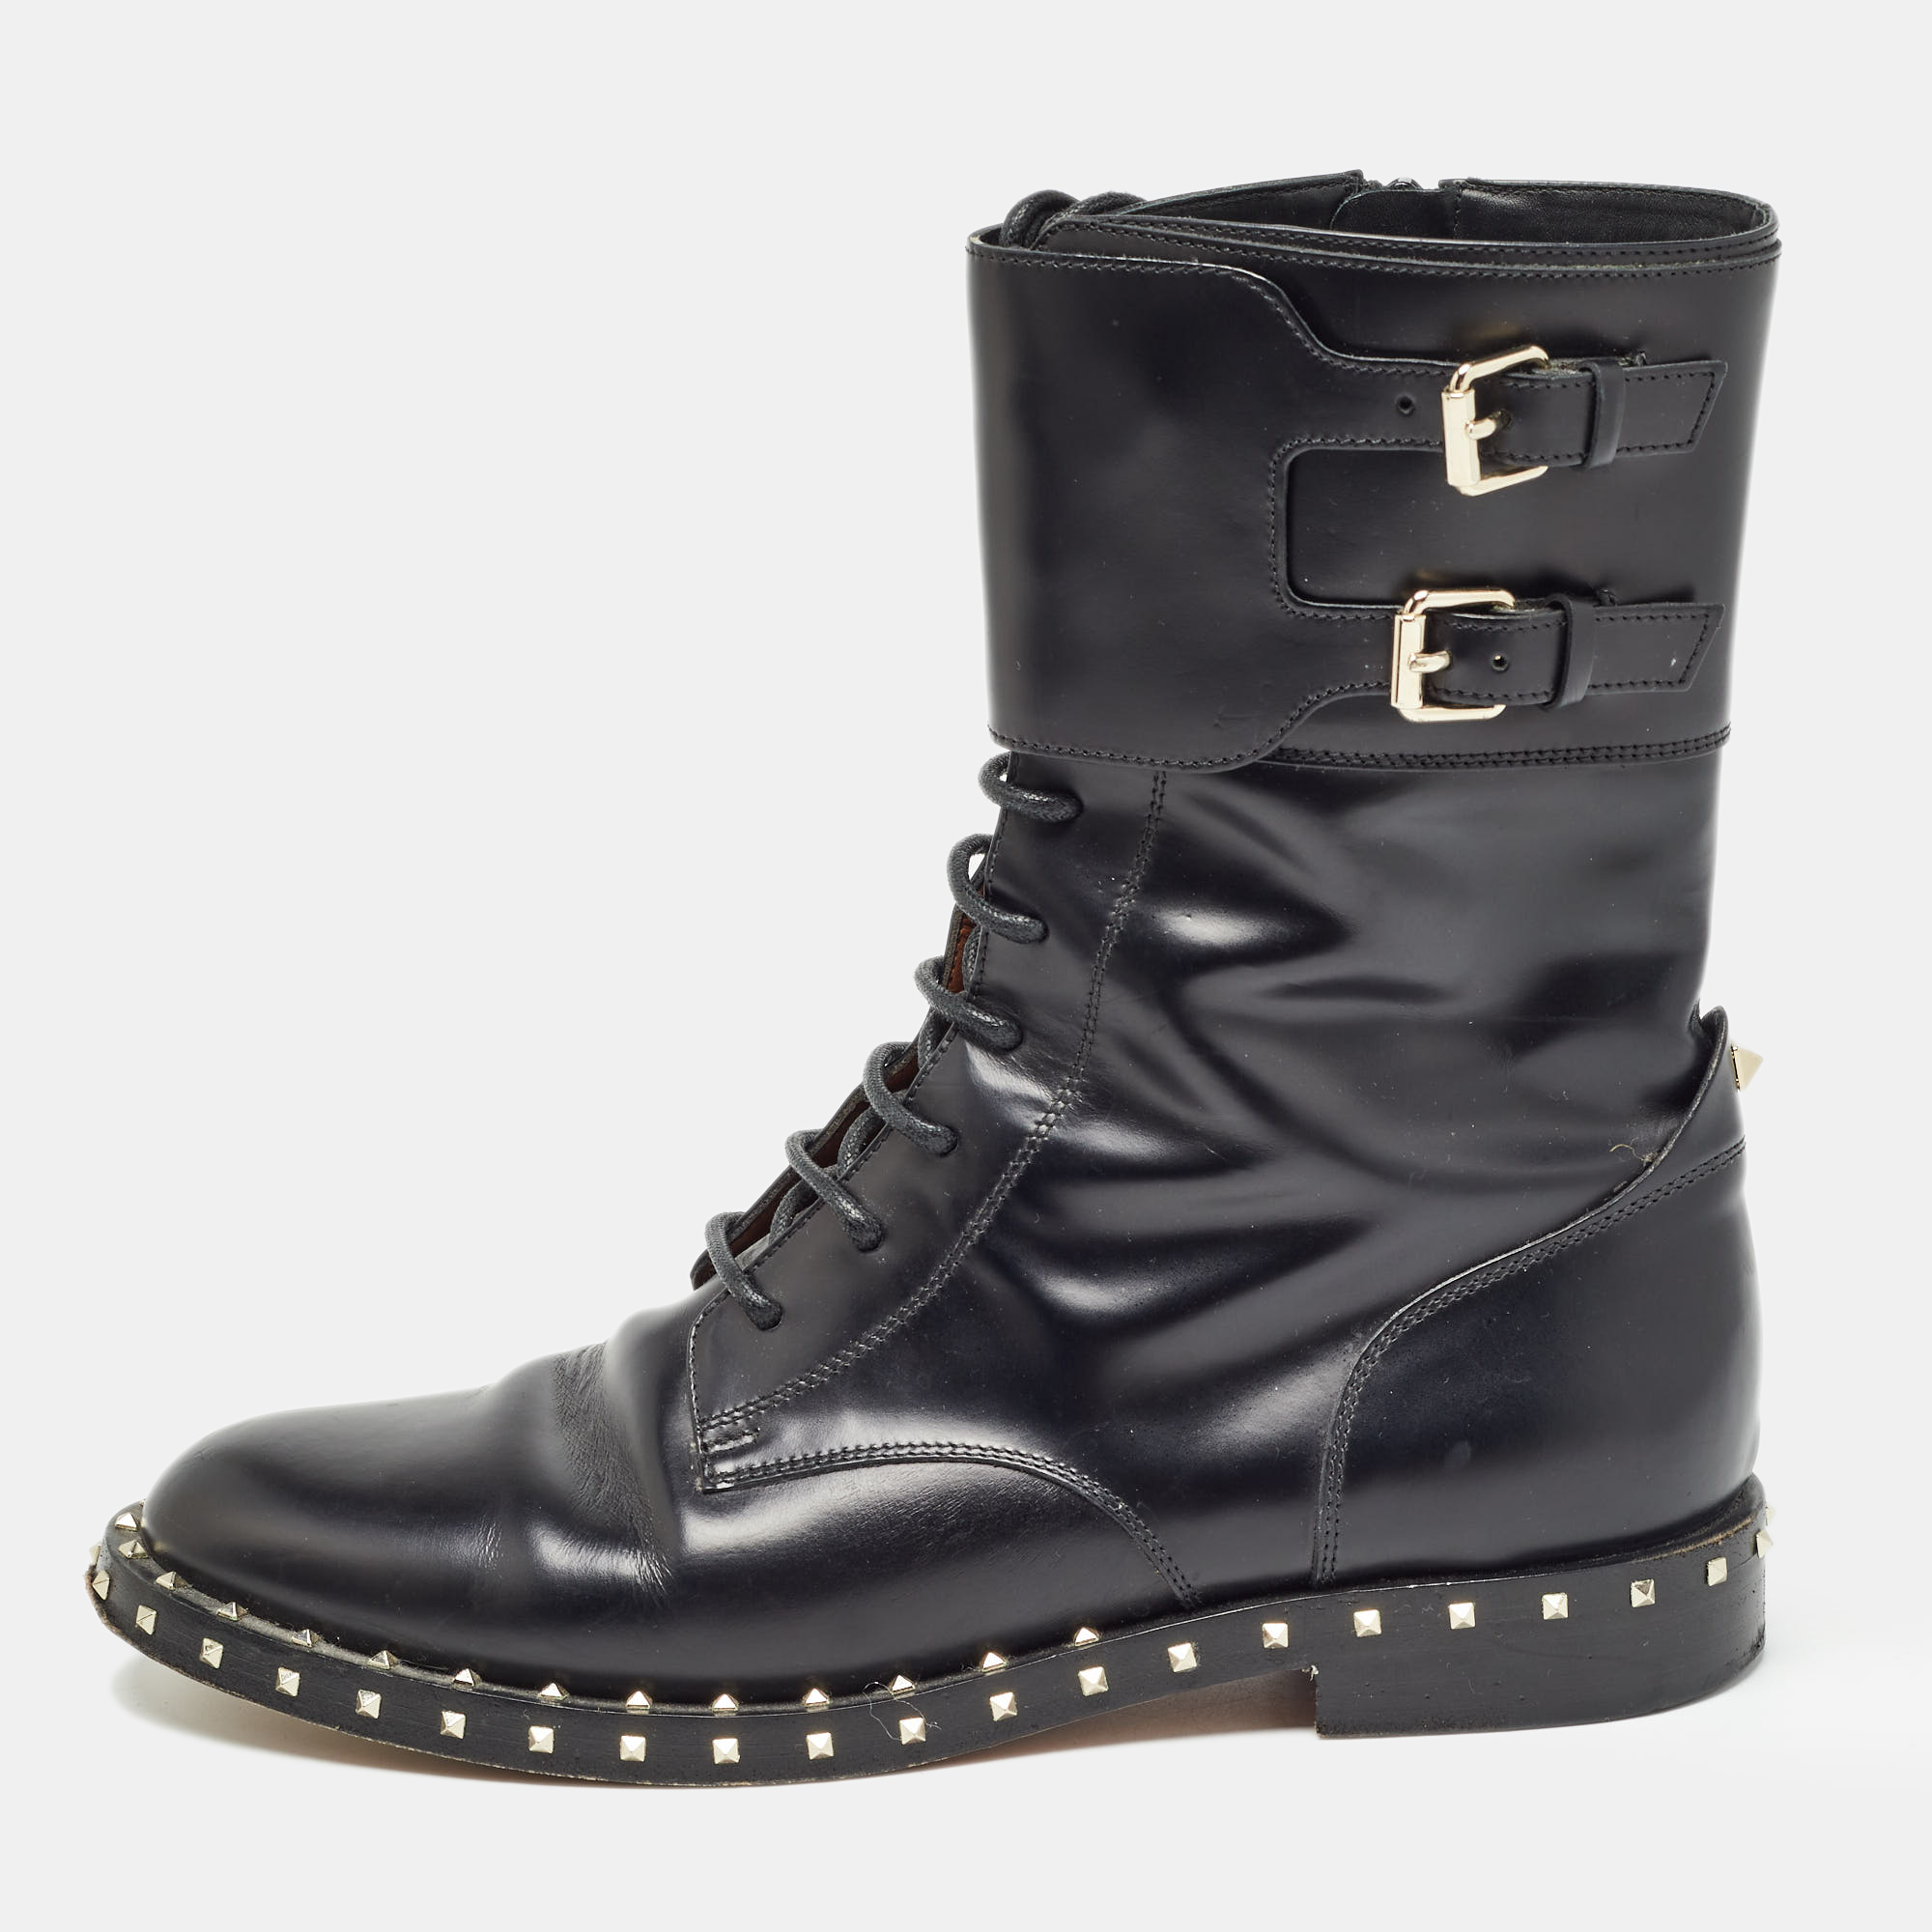 Valentino black leather studded accents combat boots size 39.5